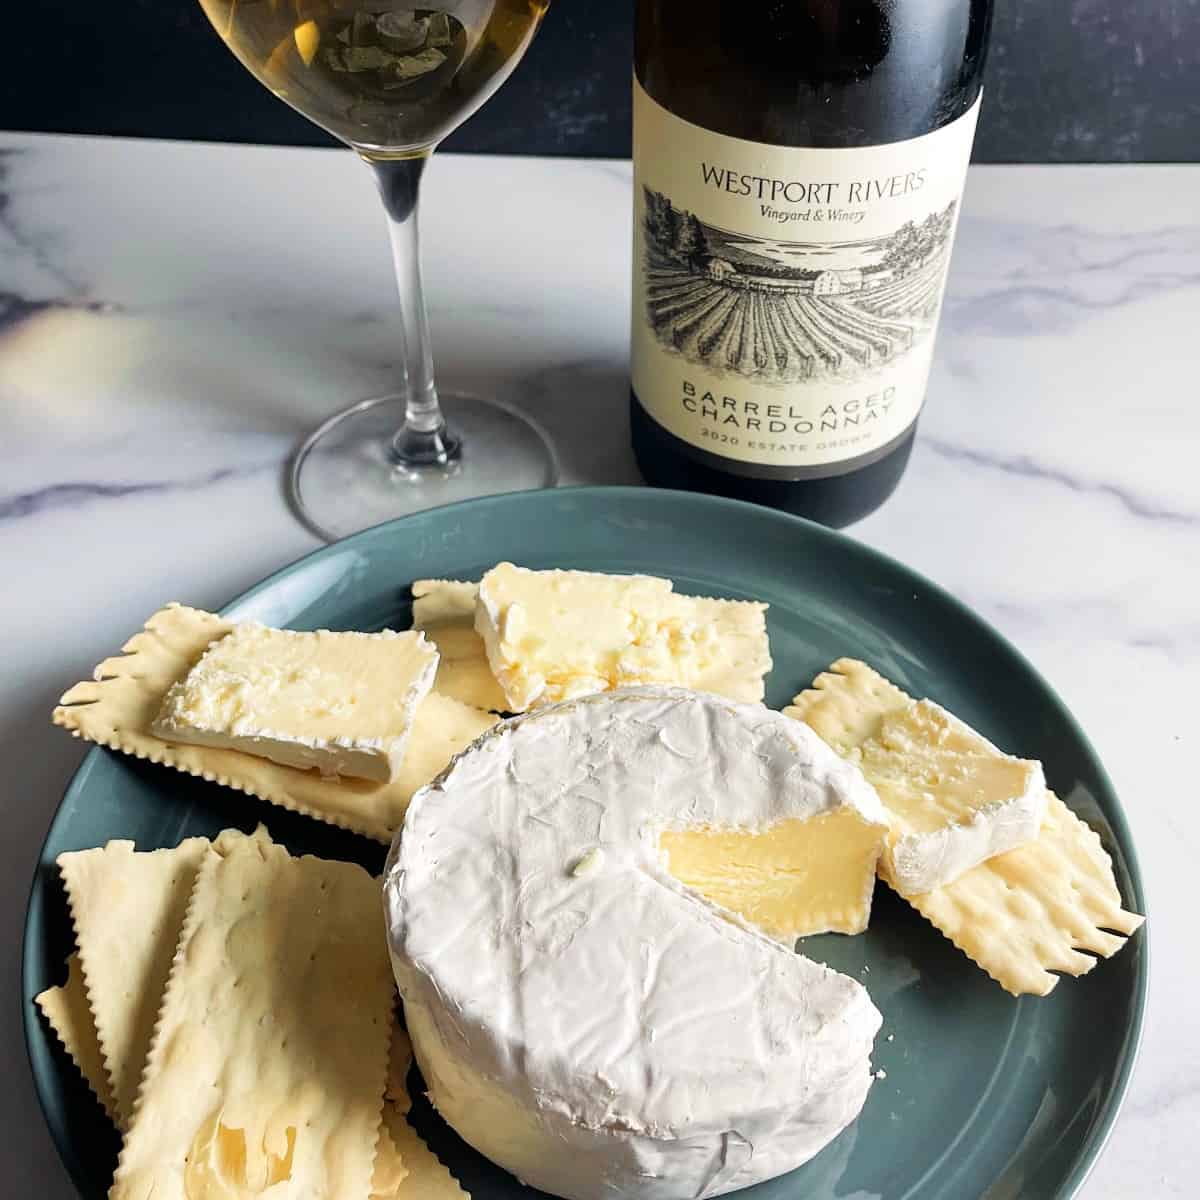 plate of brie served with a Westport Rivers Chardonnay.